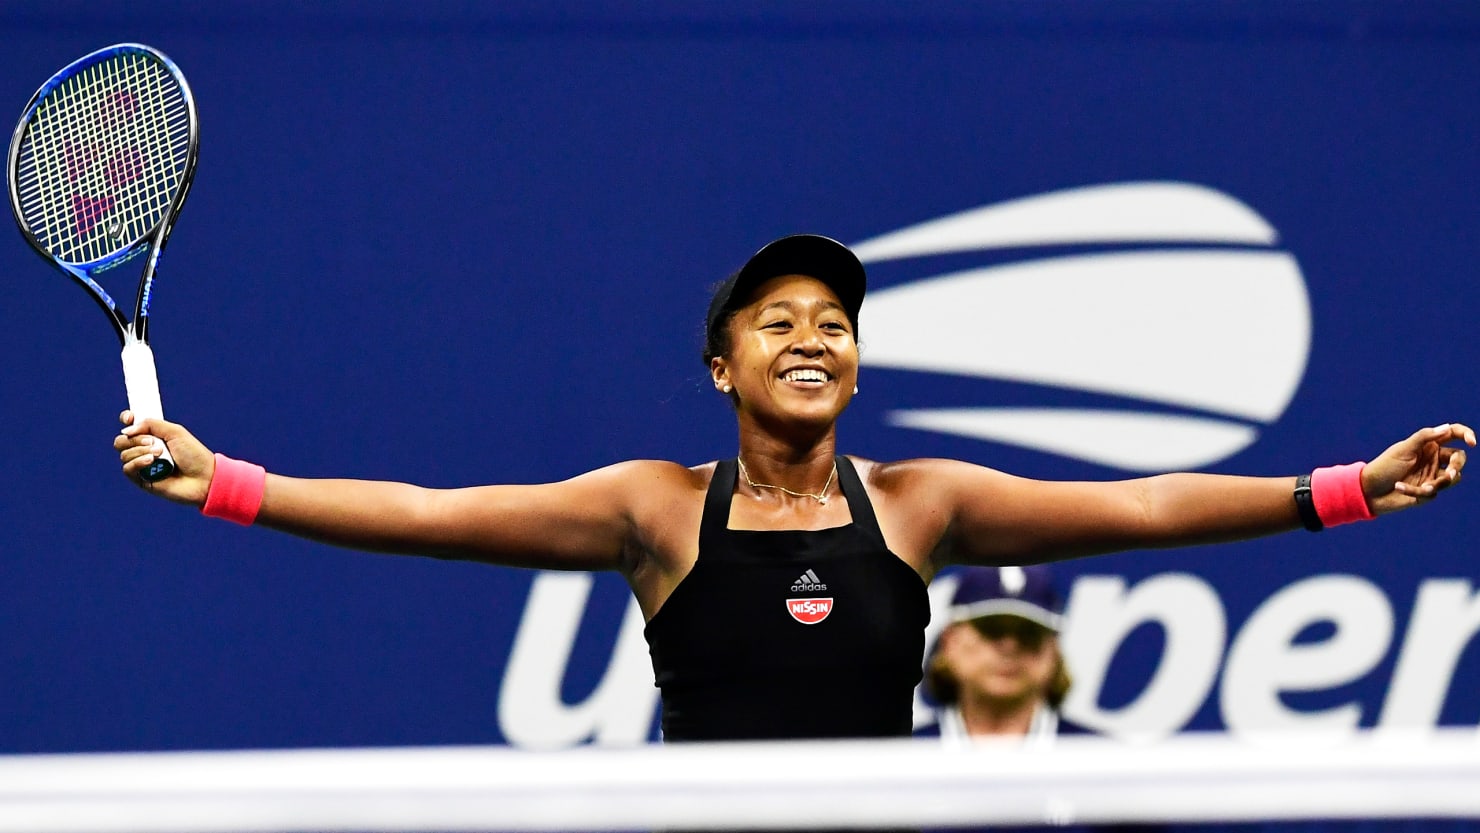 Opinion: Why ignore Naomi Osaka's Haitian heritage? Identity has long been  a product of mixed marriages, just look at China